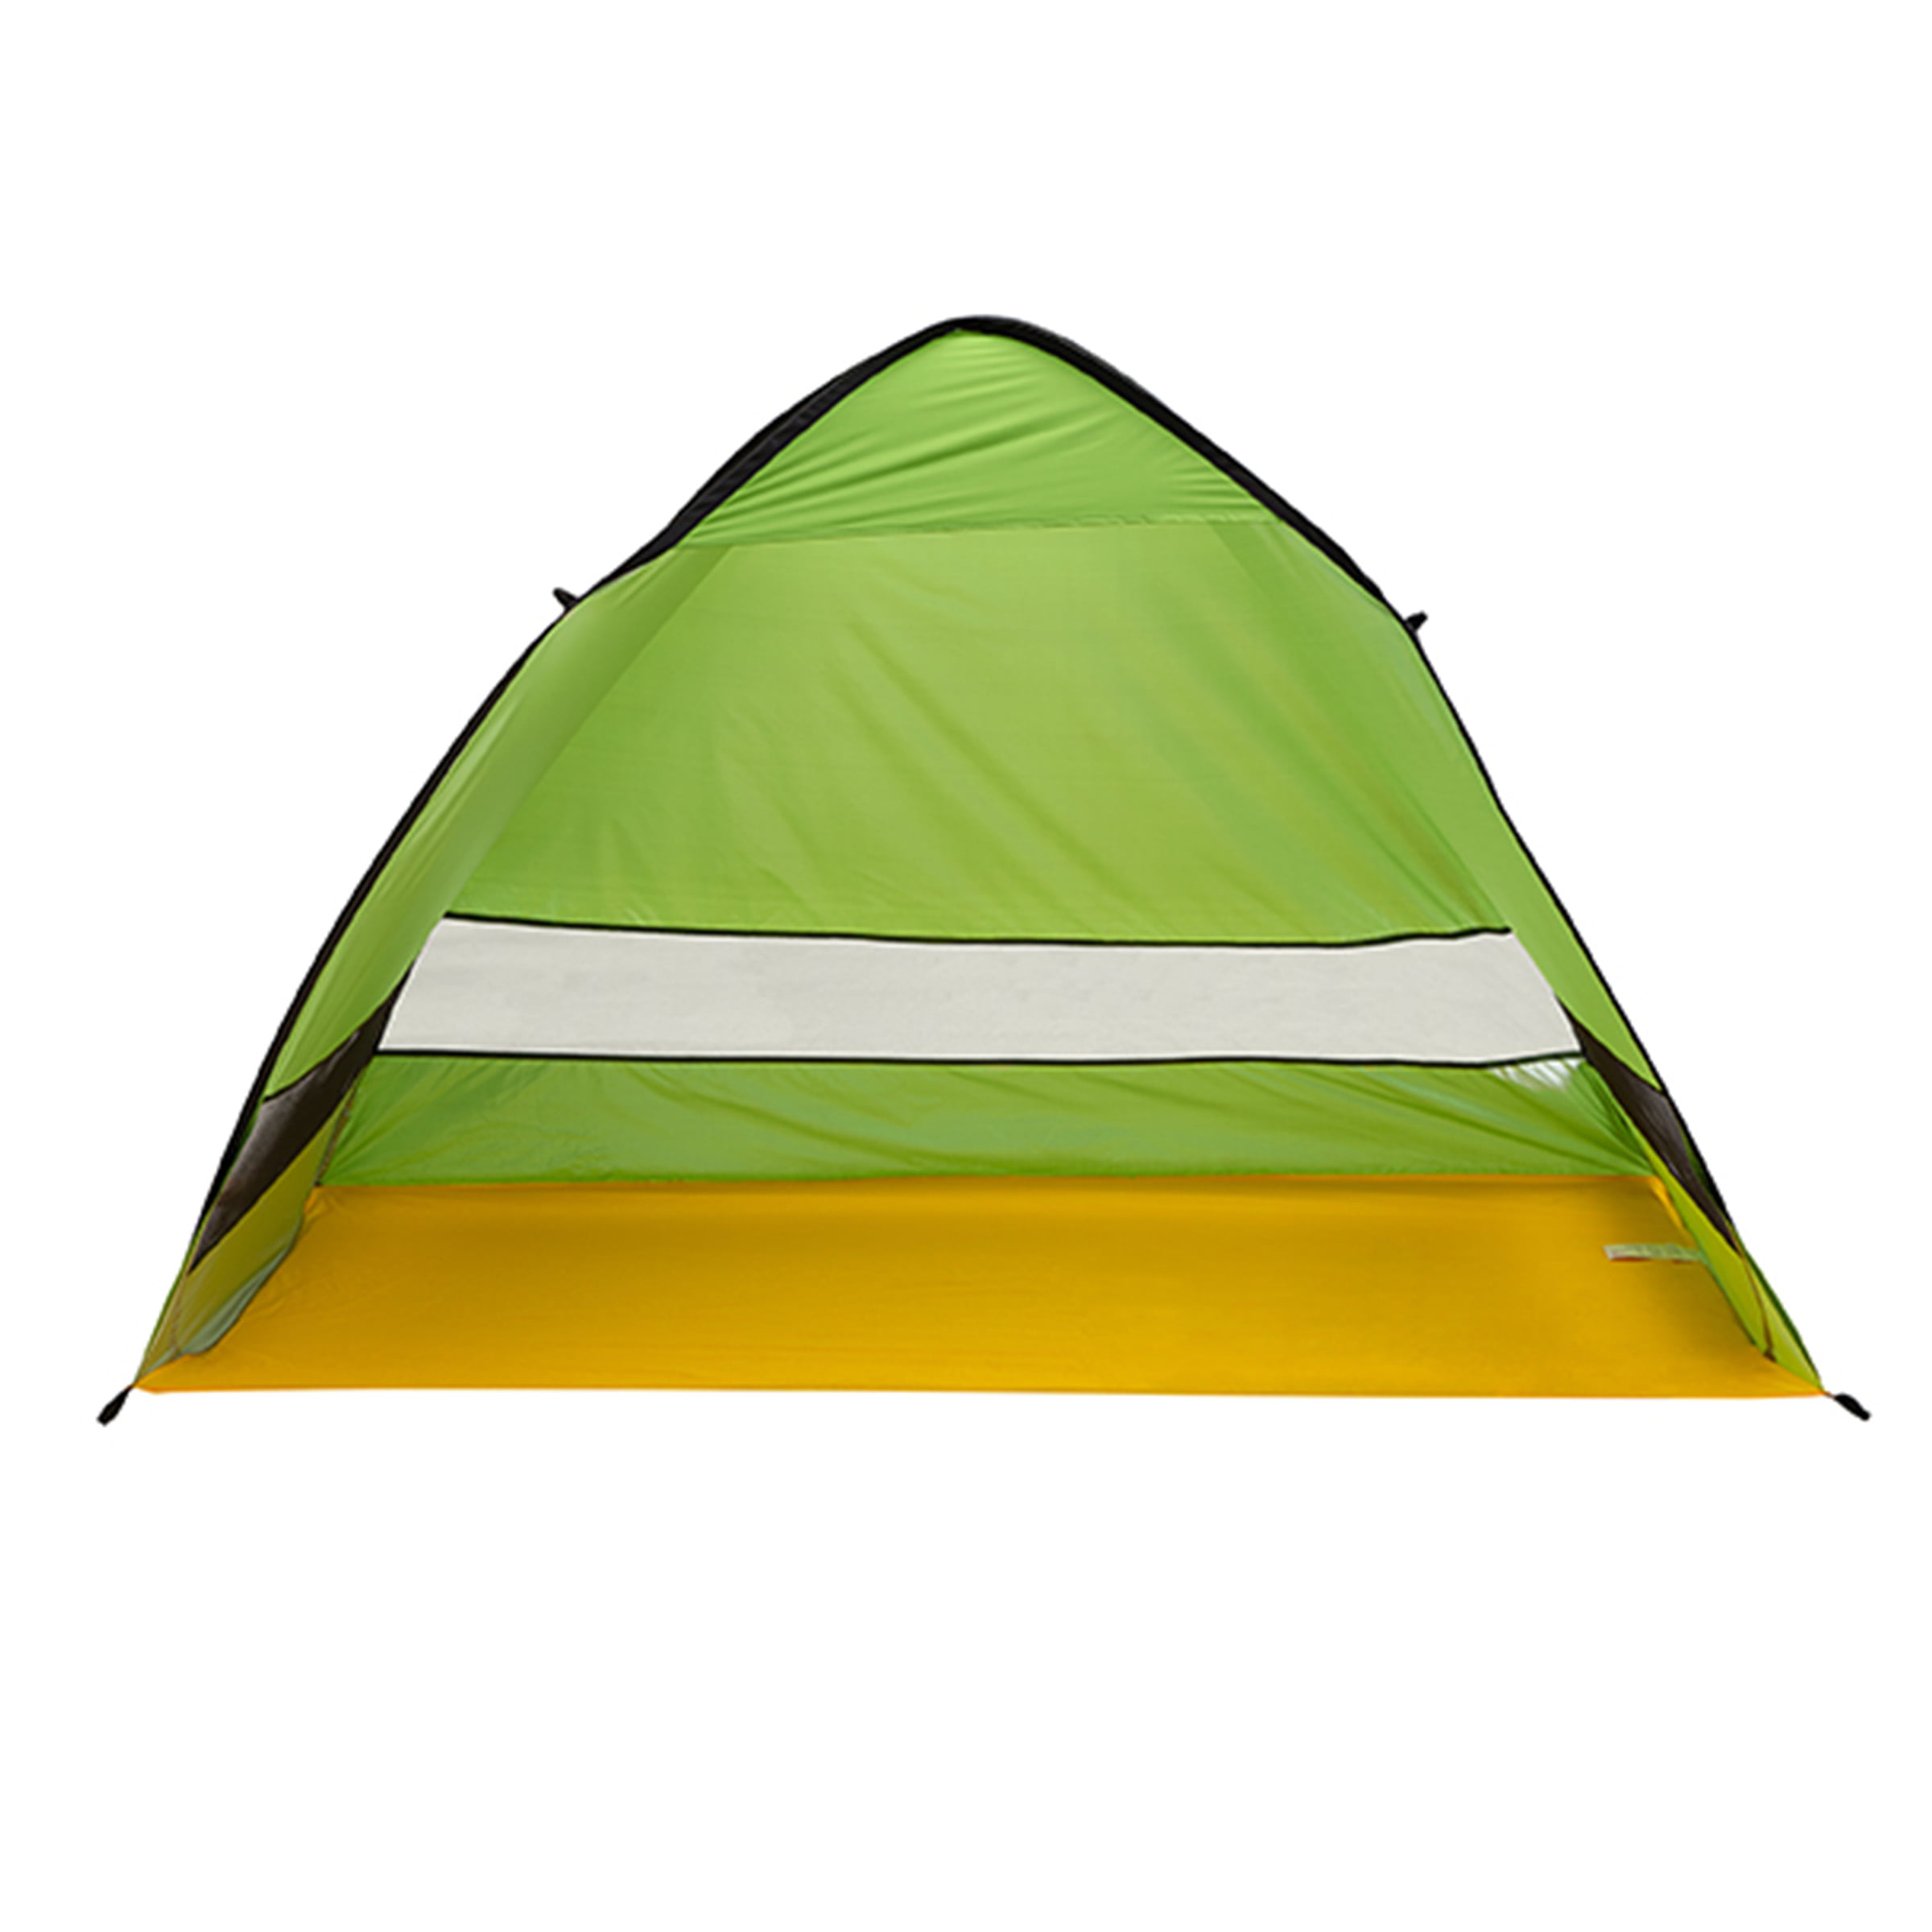 pijpleiding zout Split Pop Up Beach Tent with UV Protection and Ventilation Windows – Water and  Wind Resistant Sun Shelter for Camping, Fishing, or Play by Wakeman (Green)  - Walmart.com